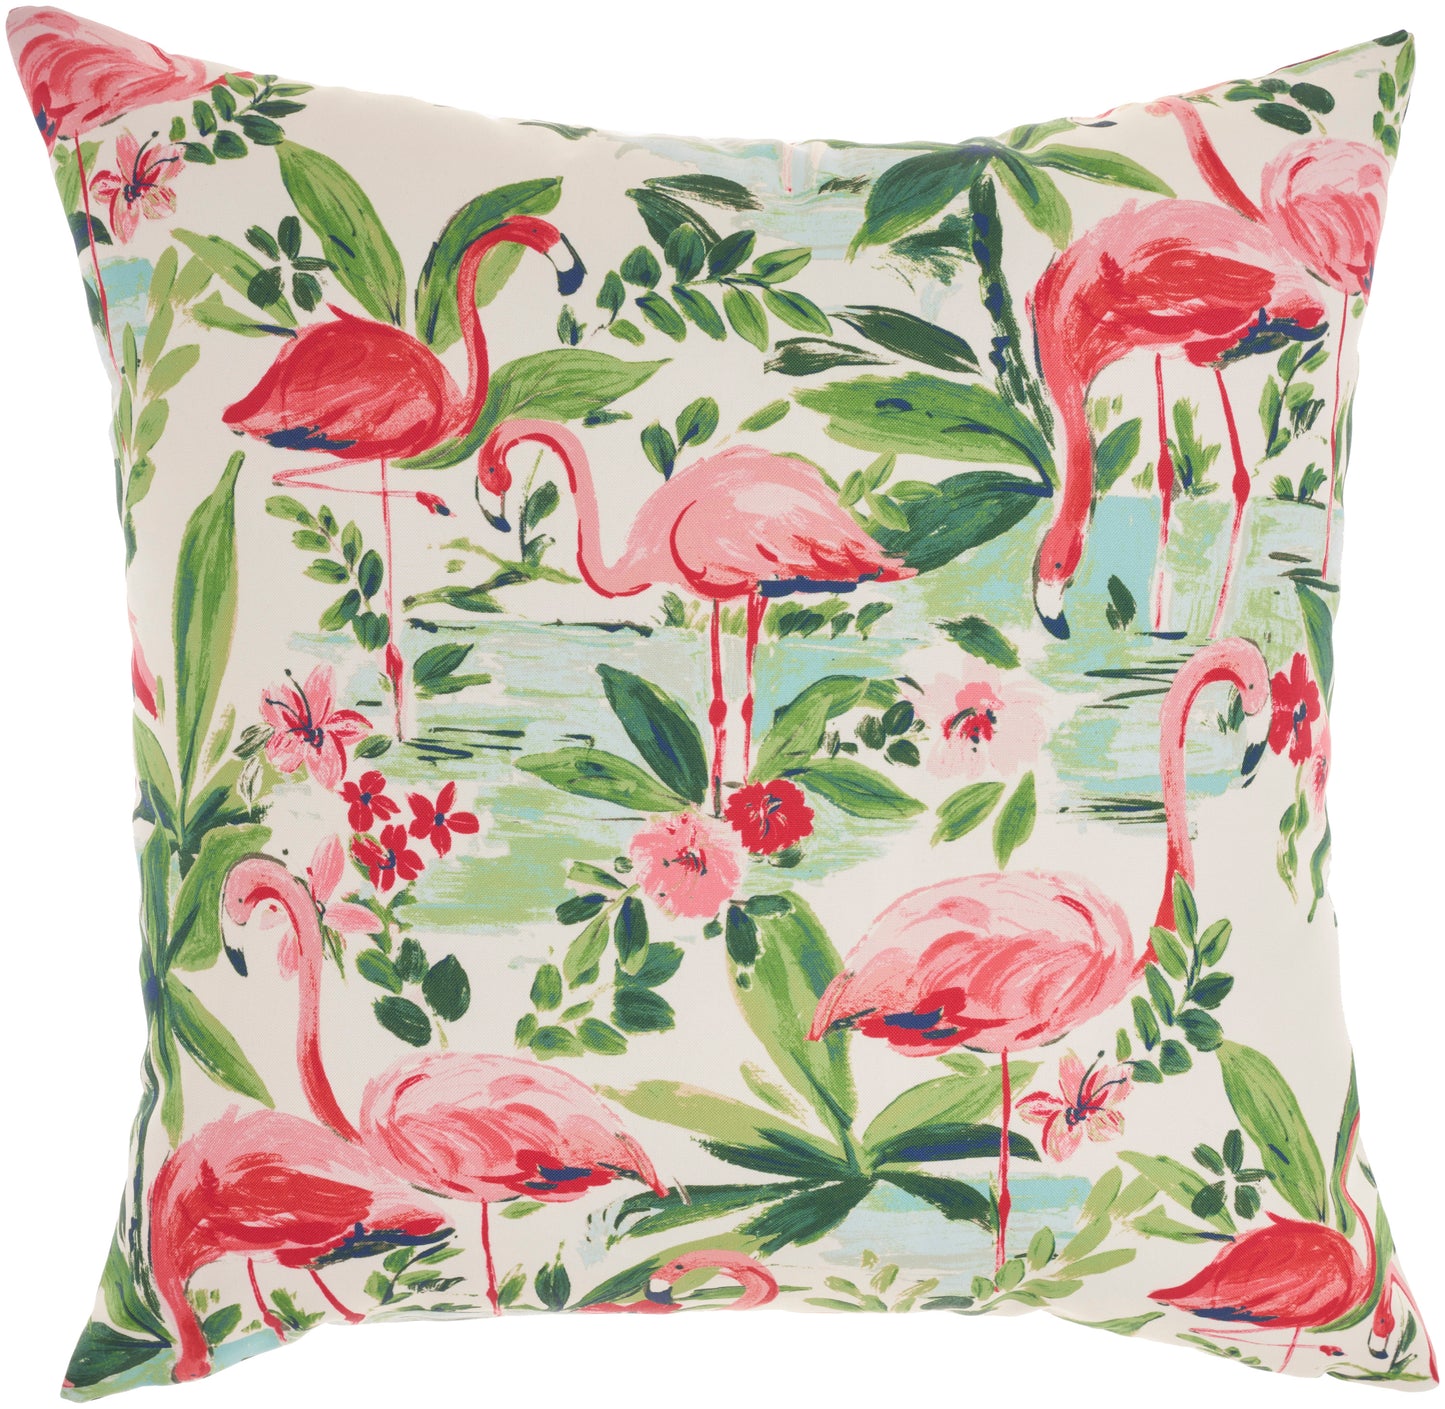 Waverly Pillows WP002 Synthetic Blend Flamingos Throw Pillow From Waverly By Nourison Rugs